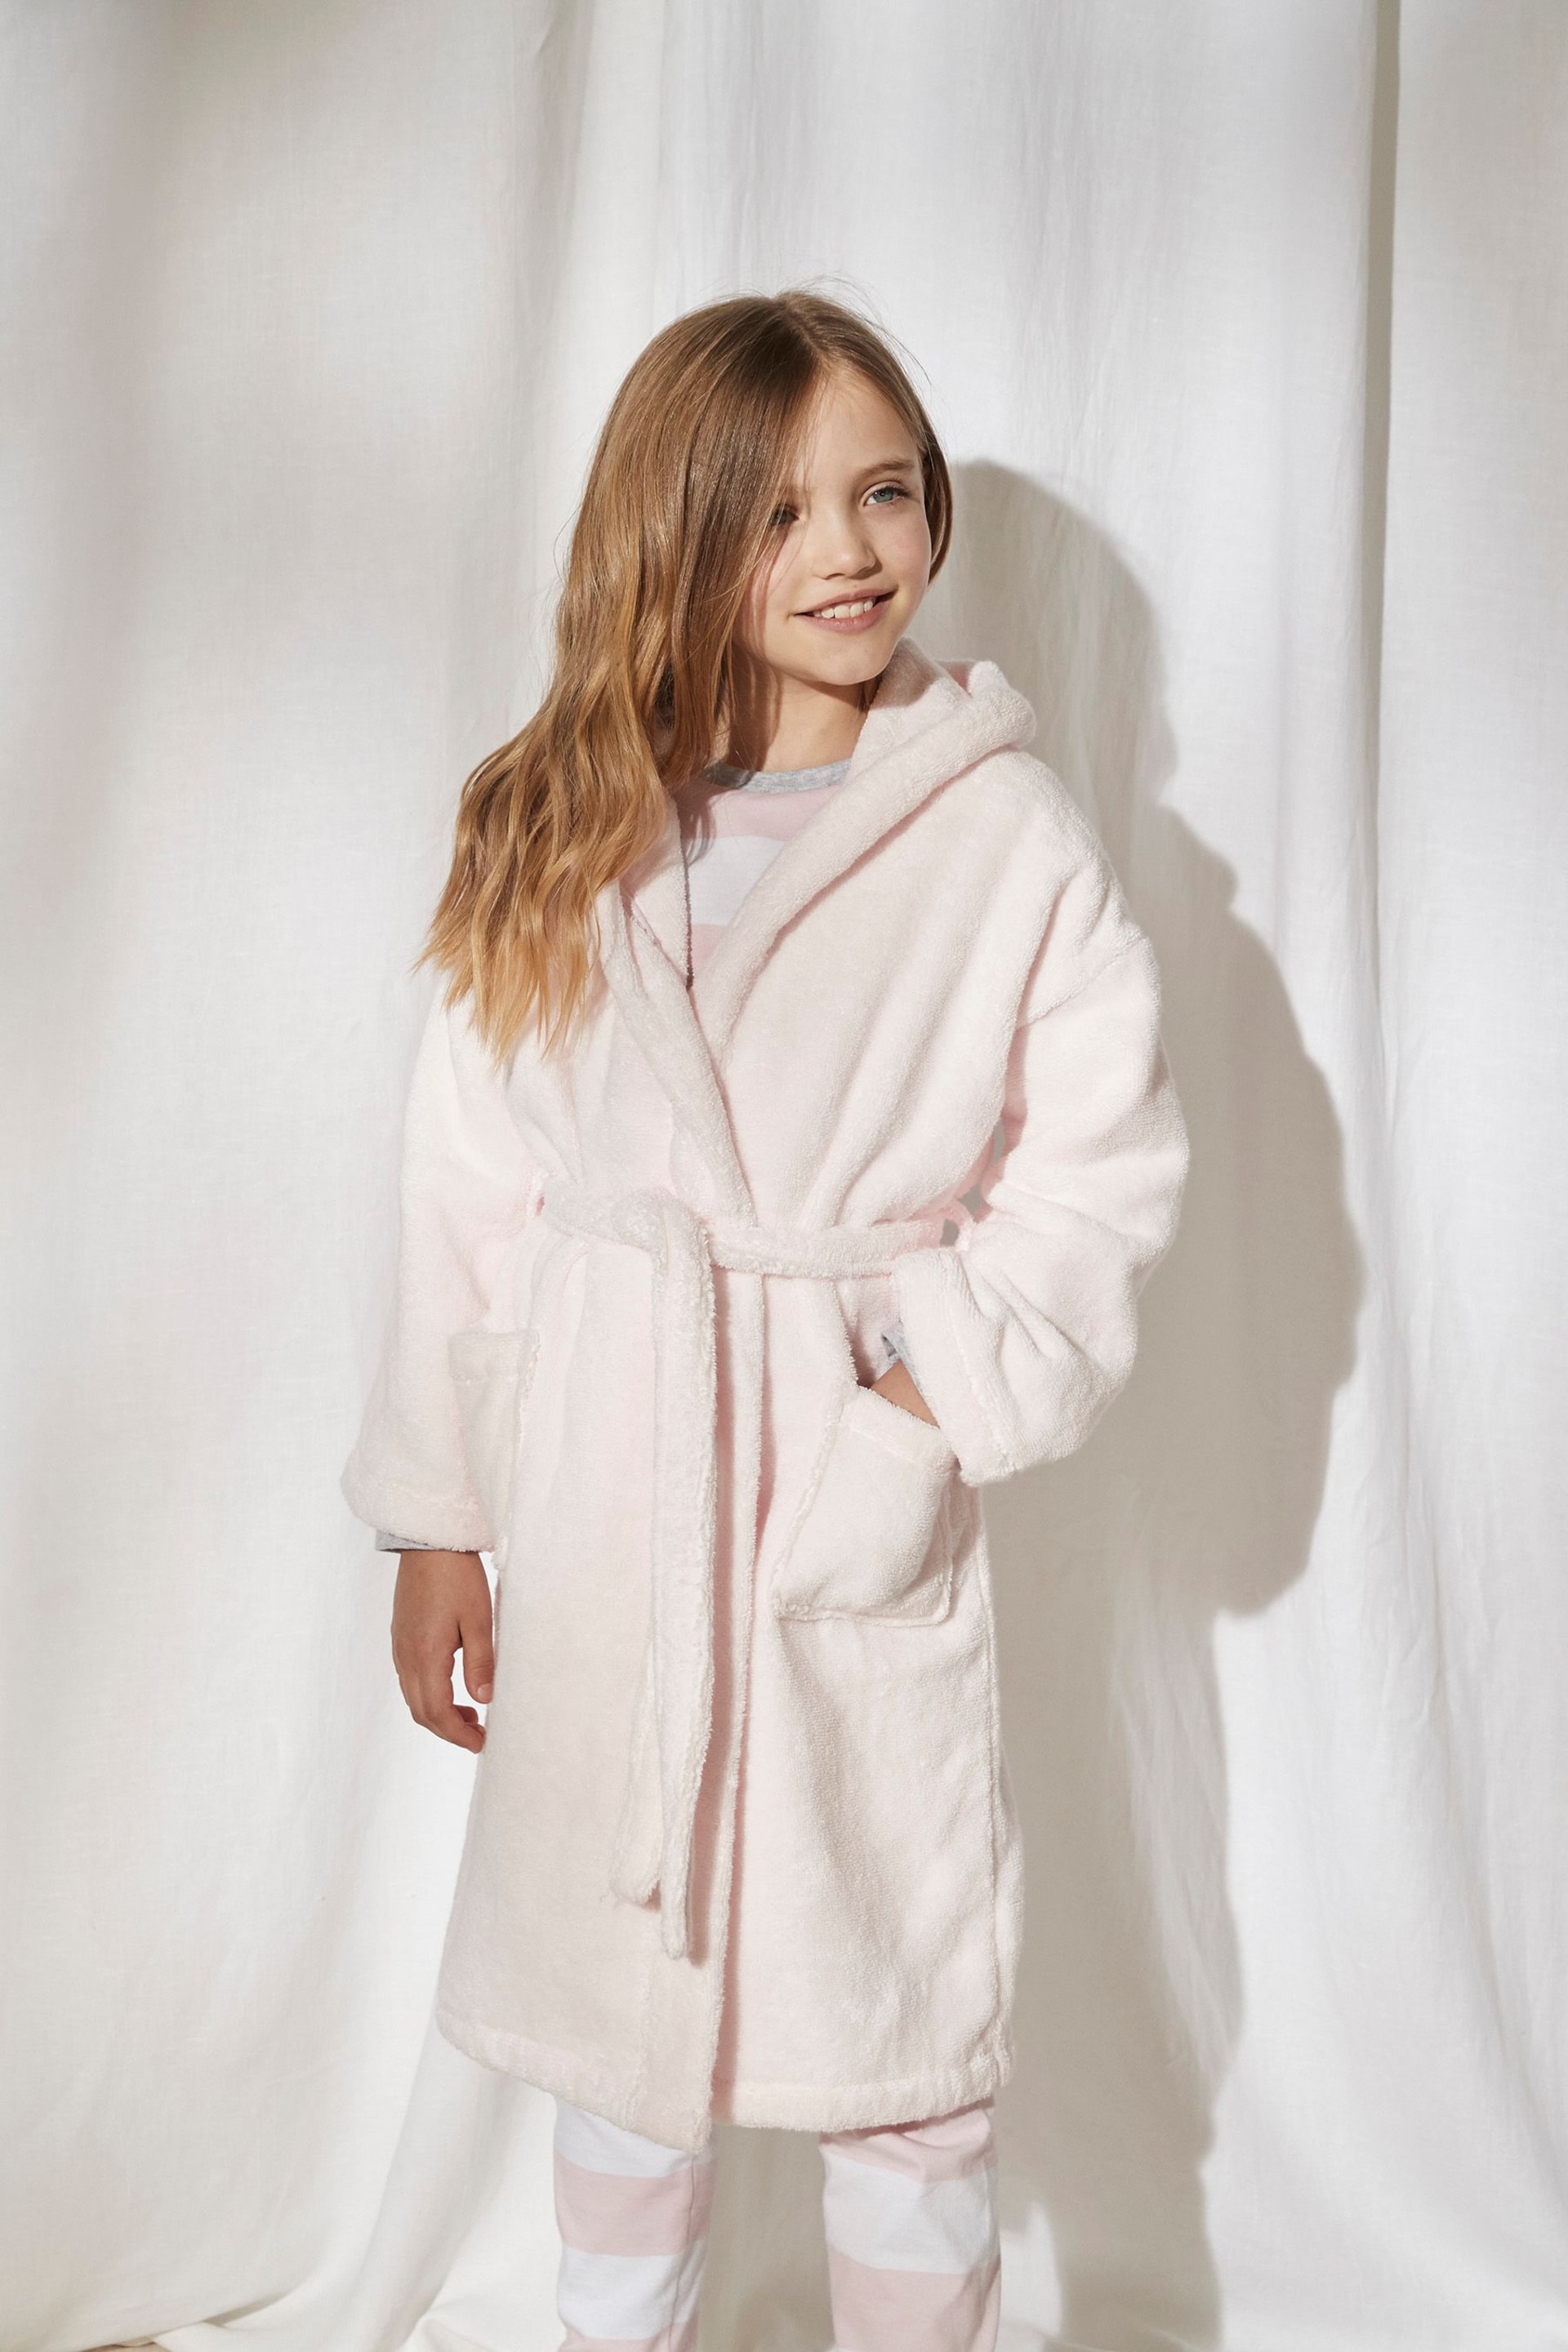 The White Company Hydrocotton Dressing Gown - Image 1 of 5